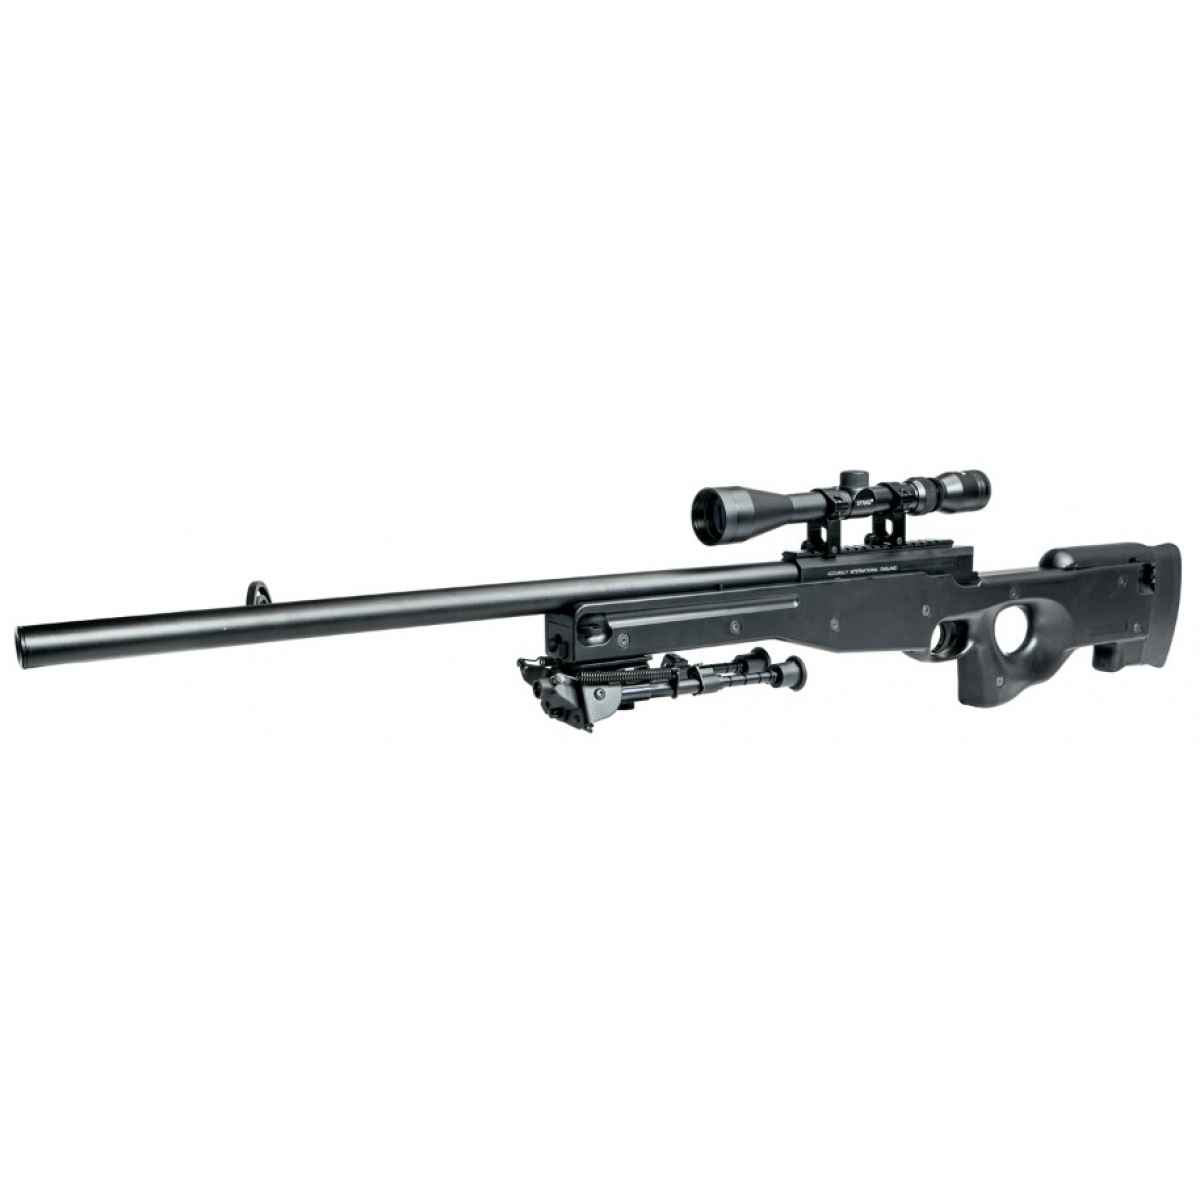 Details about   ASG AW Licensed 308 Airsoft Bolt Action Spring Sniper Rifle BLACK 500 FPS 